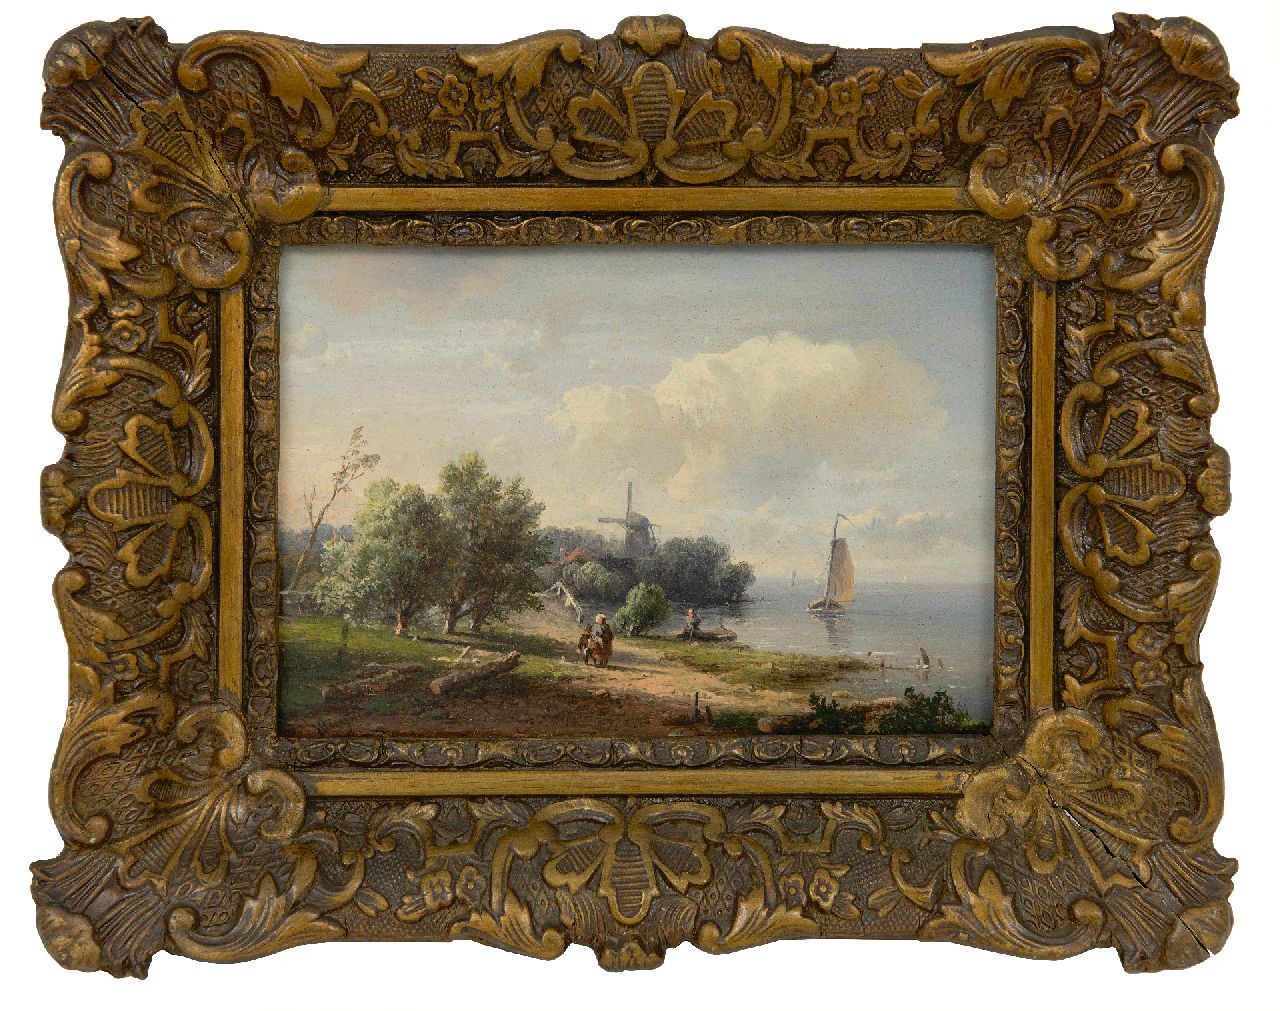 Kluyver P.L.F.  | 'Pieter' Lodewijk Francisco Kluyver | Paintings offered for sale | Summer landscape with figures and mill along the water, oil on panel 13.2 x 18.5 cm, signed l.l.